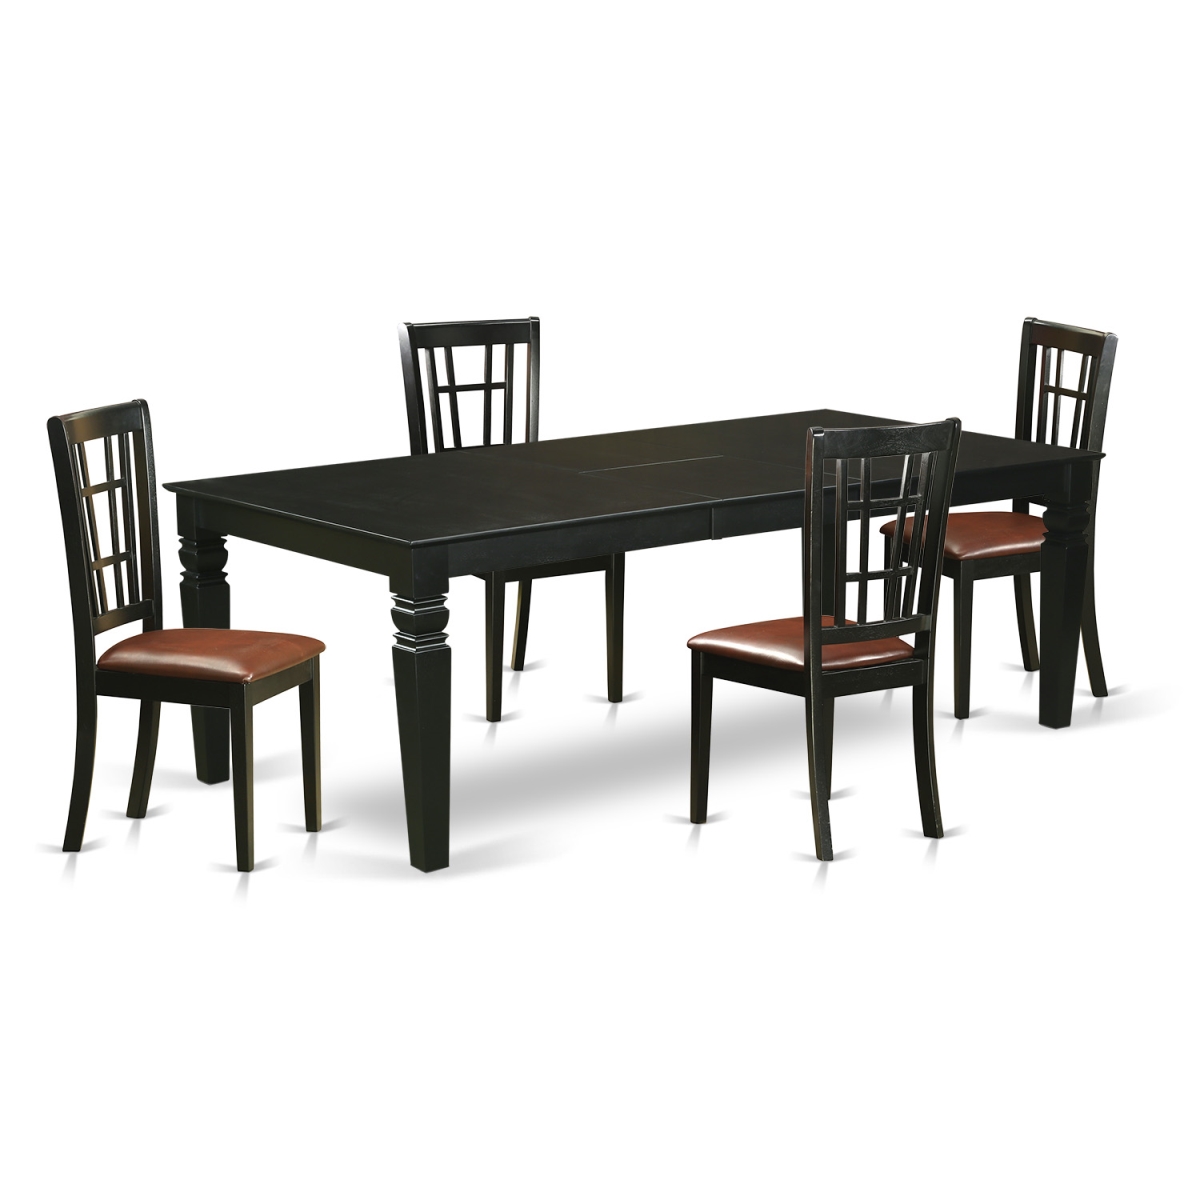 Dinette Set With A Single Logan Table & 4 Faux Leather Upholstery Seat Chairs, Luxurious Black - 5 Piece